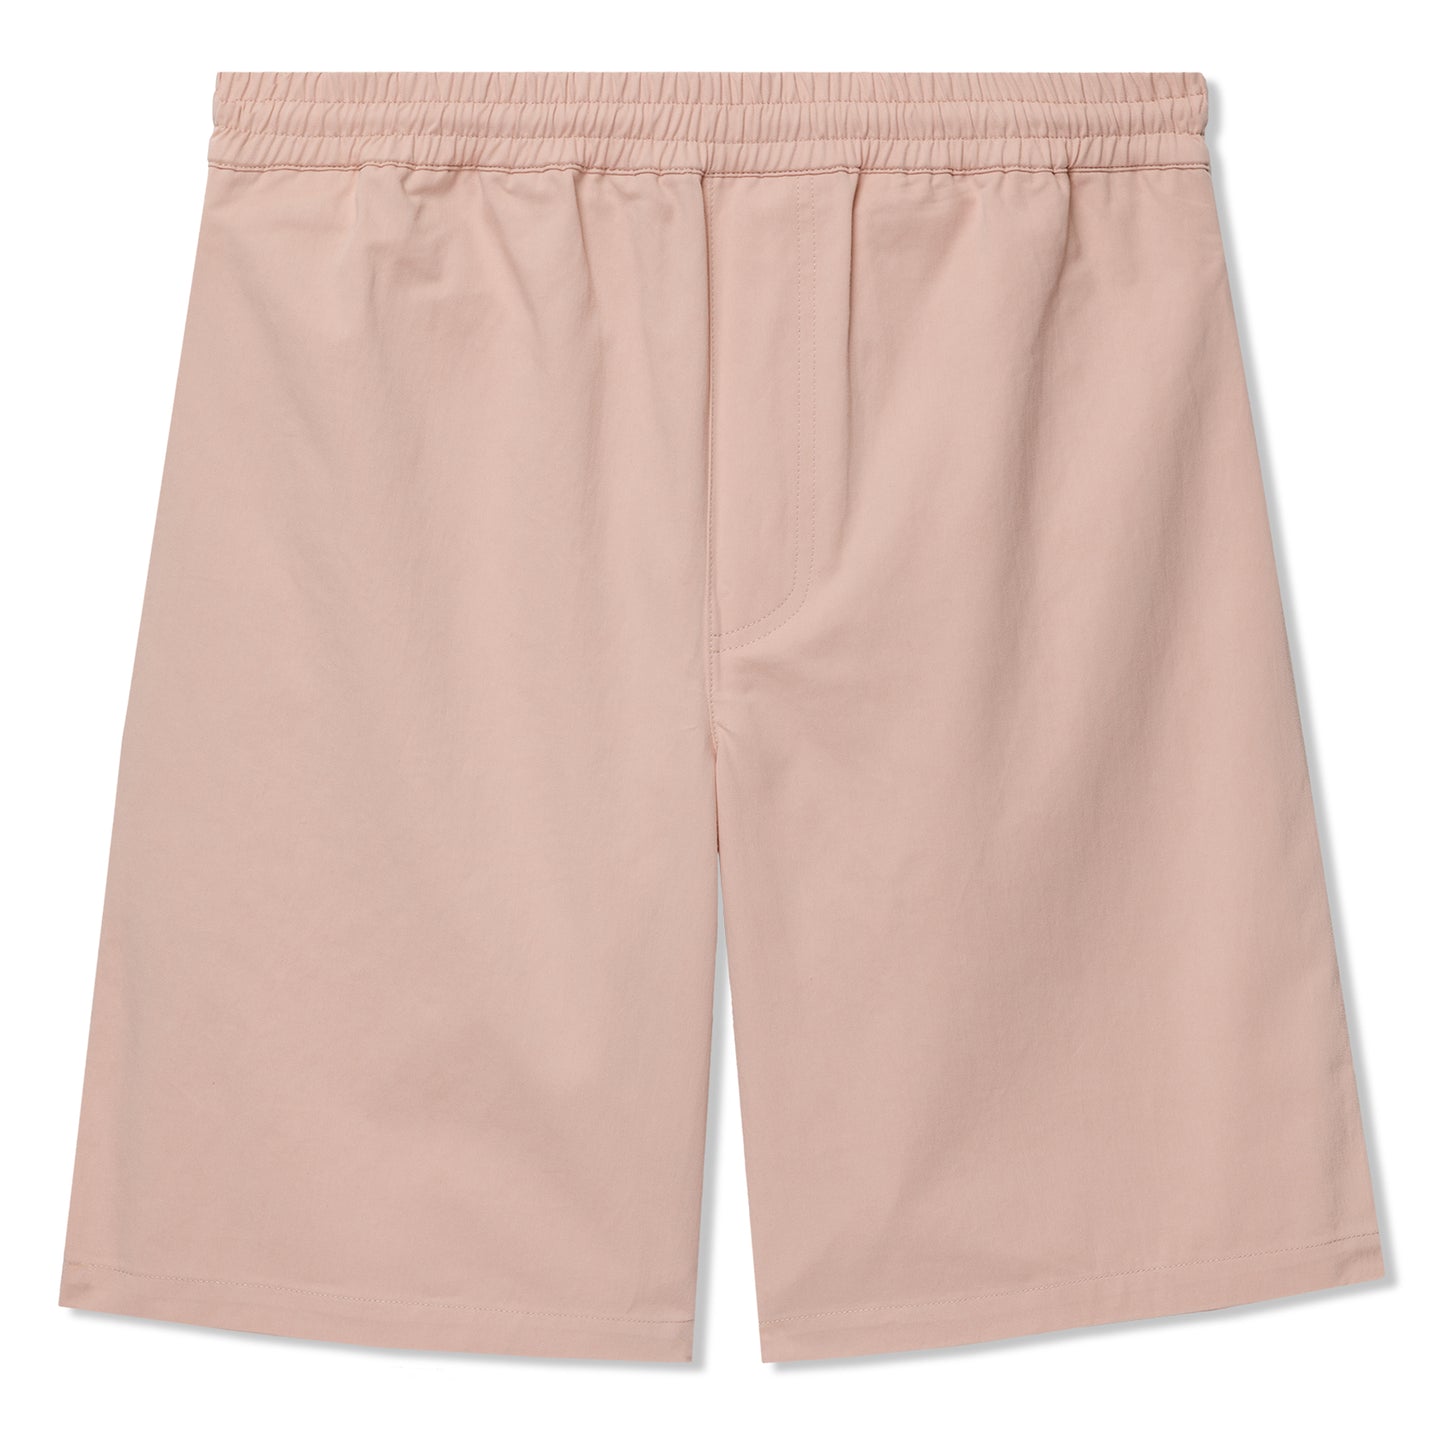 Grand Collection Cotton Short (Dust Pink)